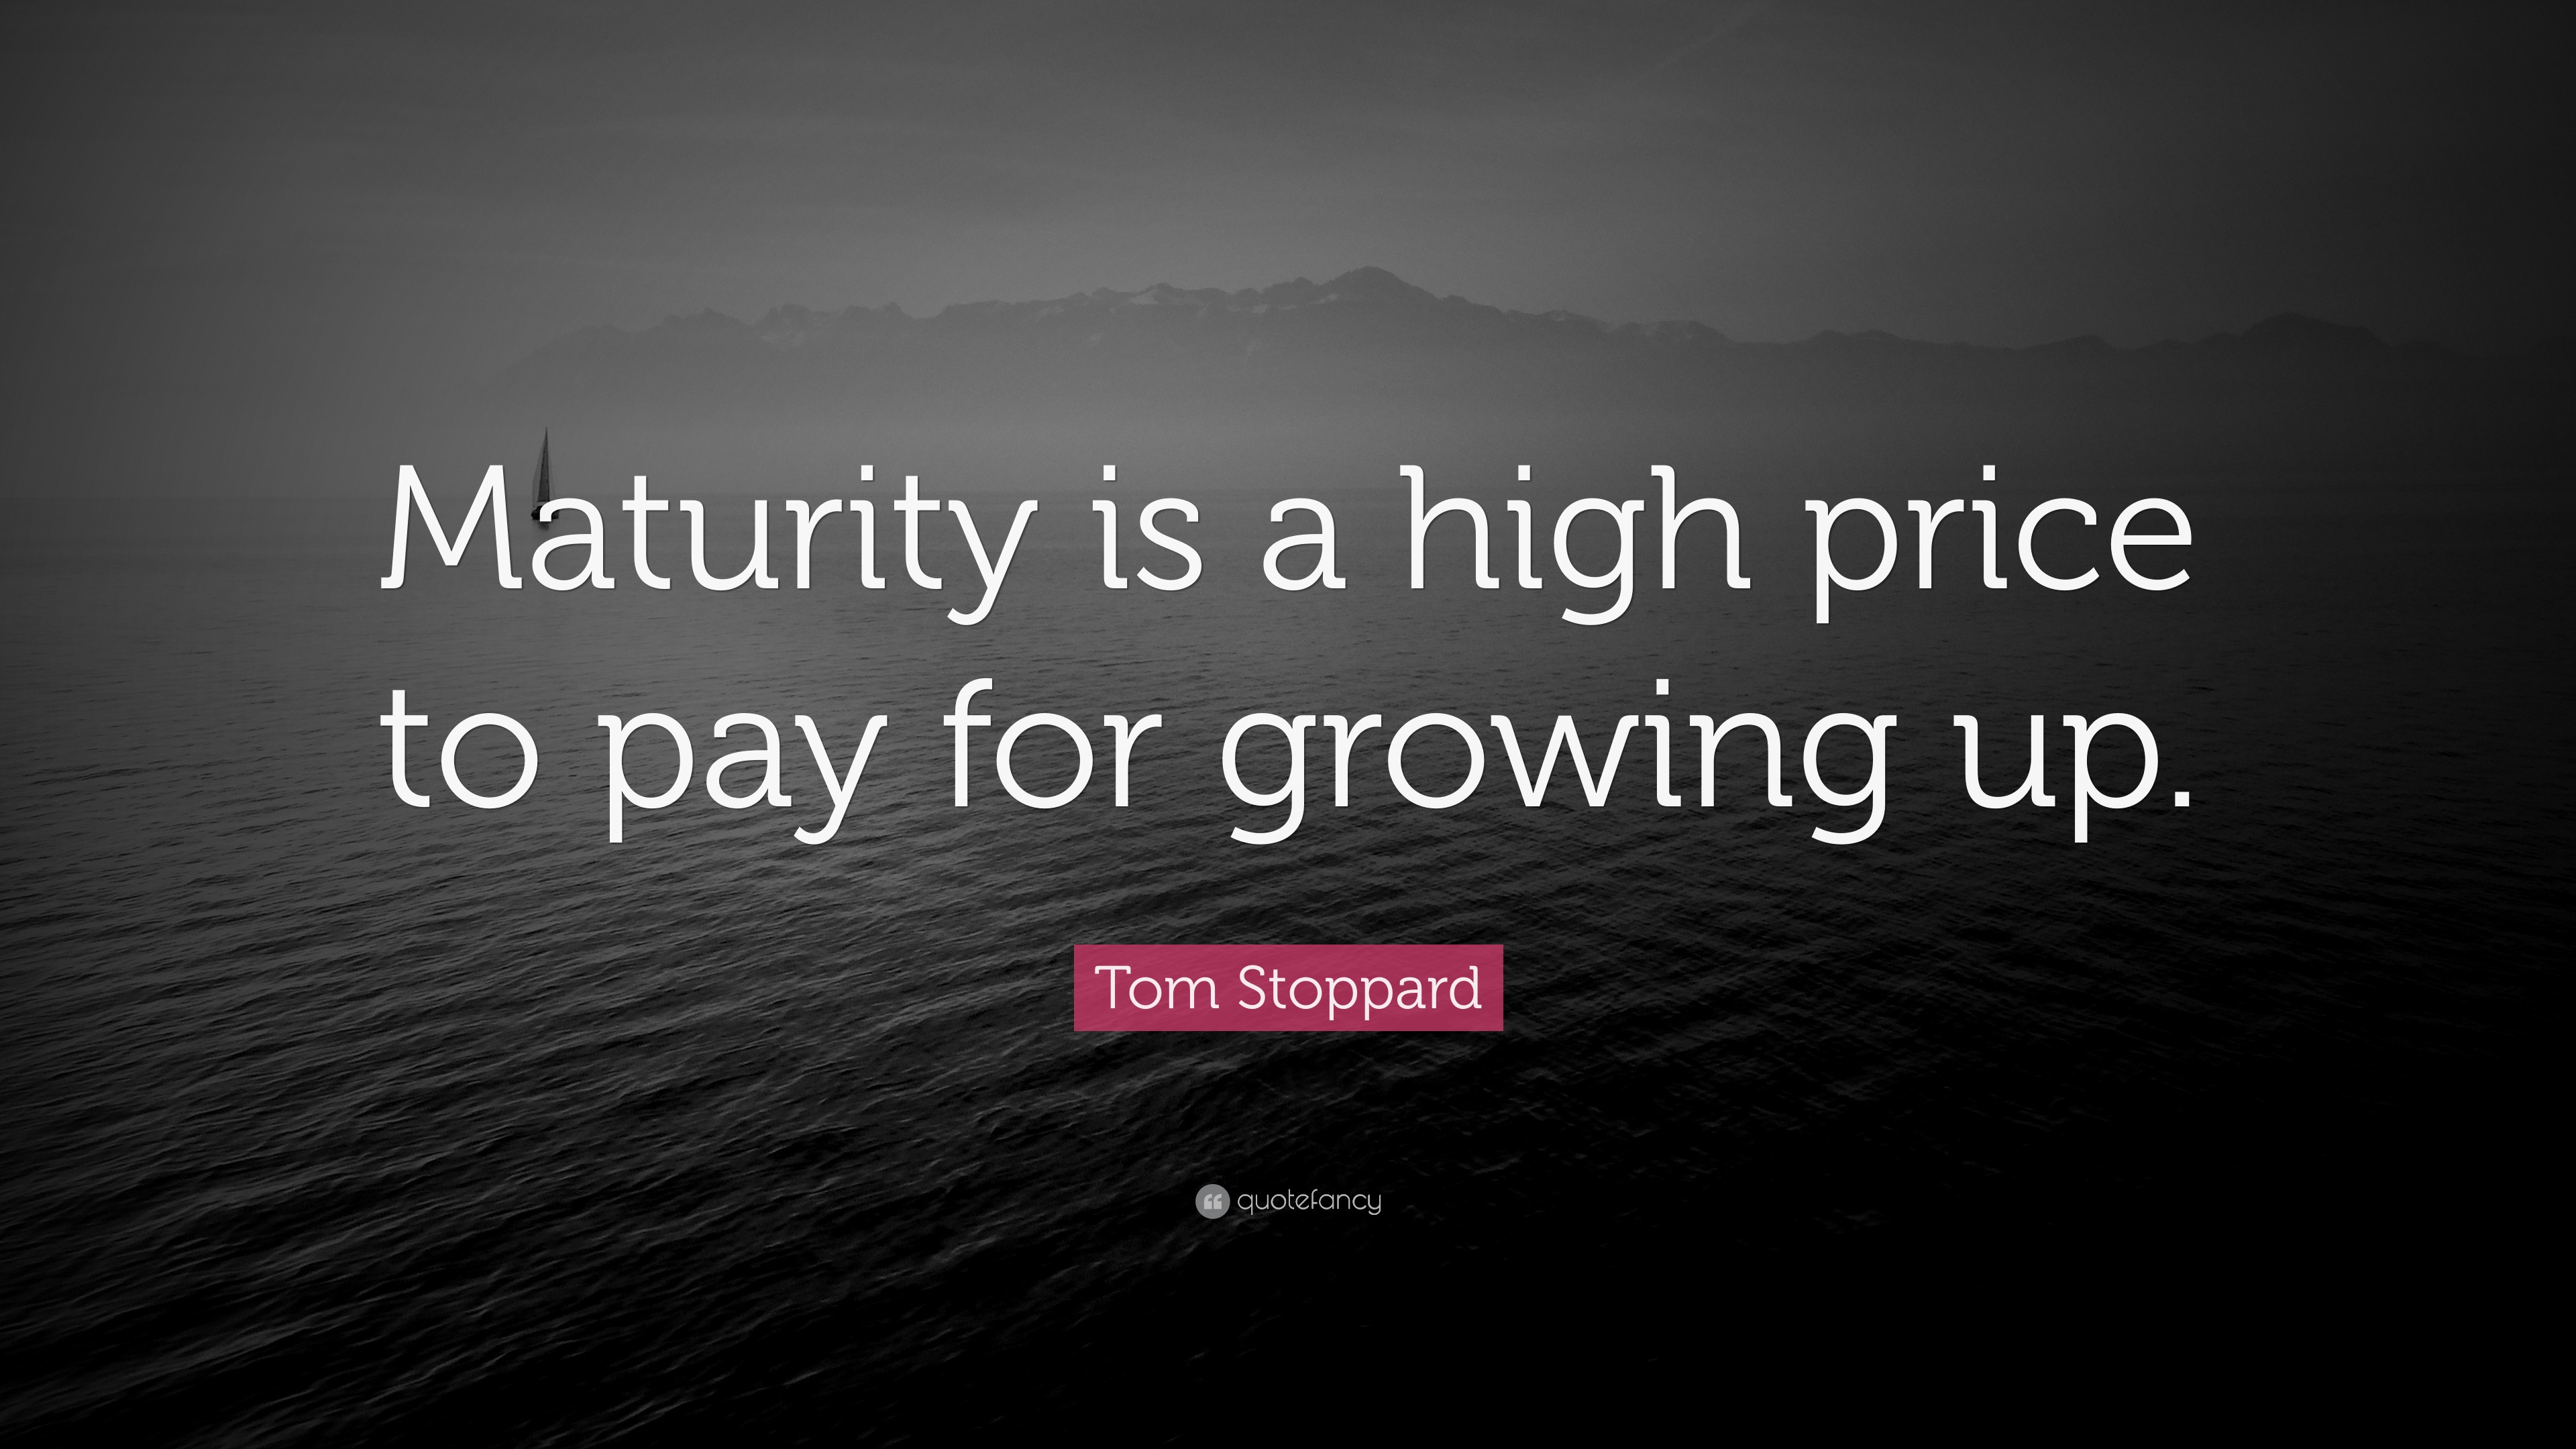 Tom Stoppard Quote “Maturity is a high price to pay for